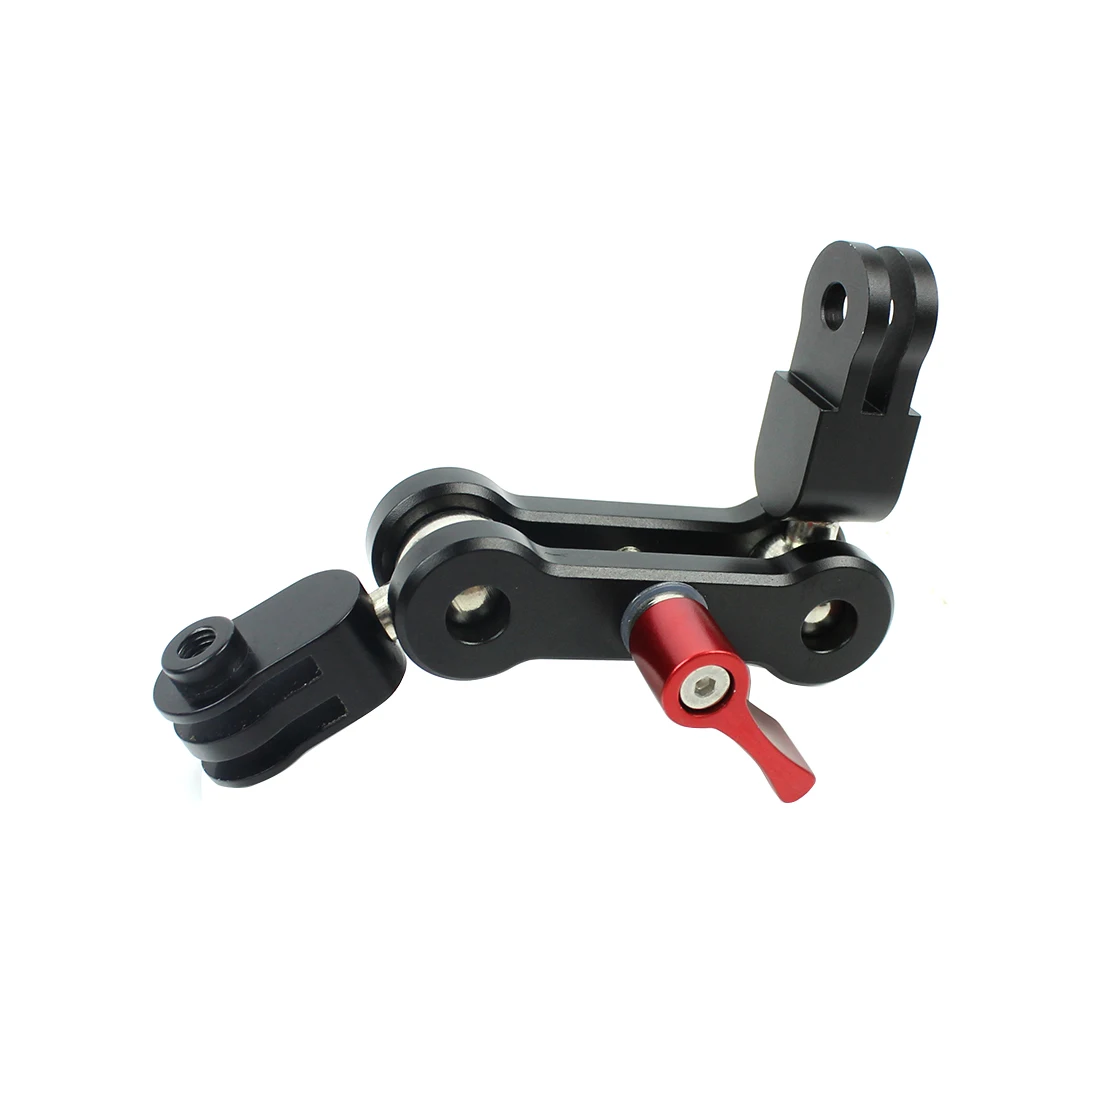 

Aluminum Alloy Magic Arm Mount Adapter Dual Head Pivot Activity Connector 360 Rotation for Gopro Action Camera for DJI Osmo